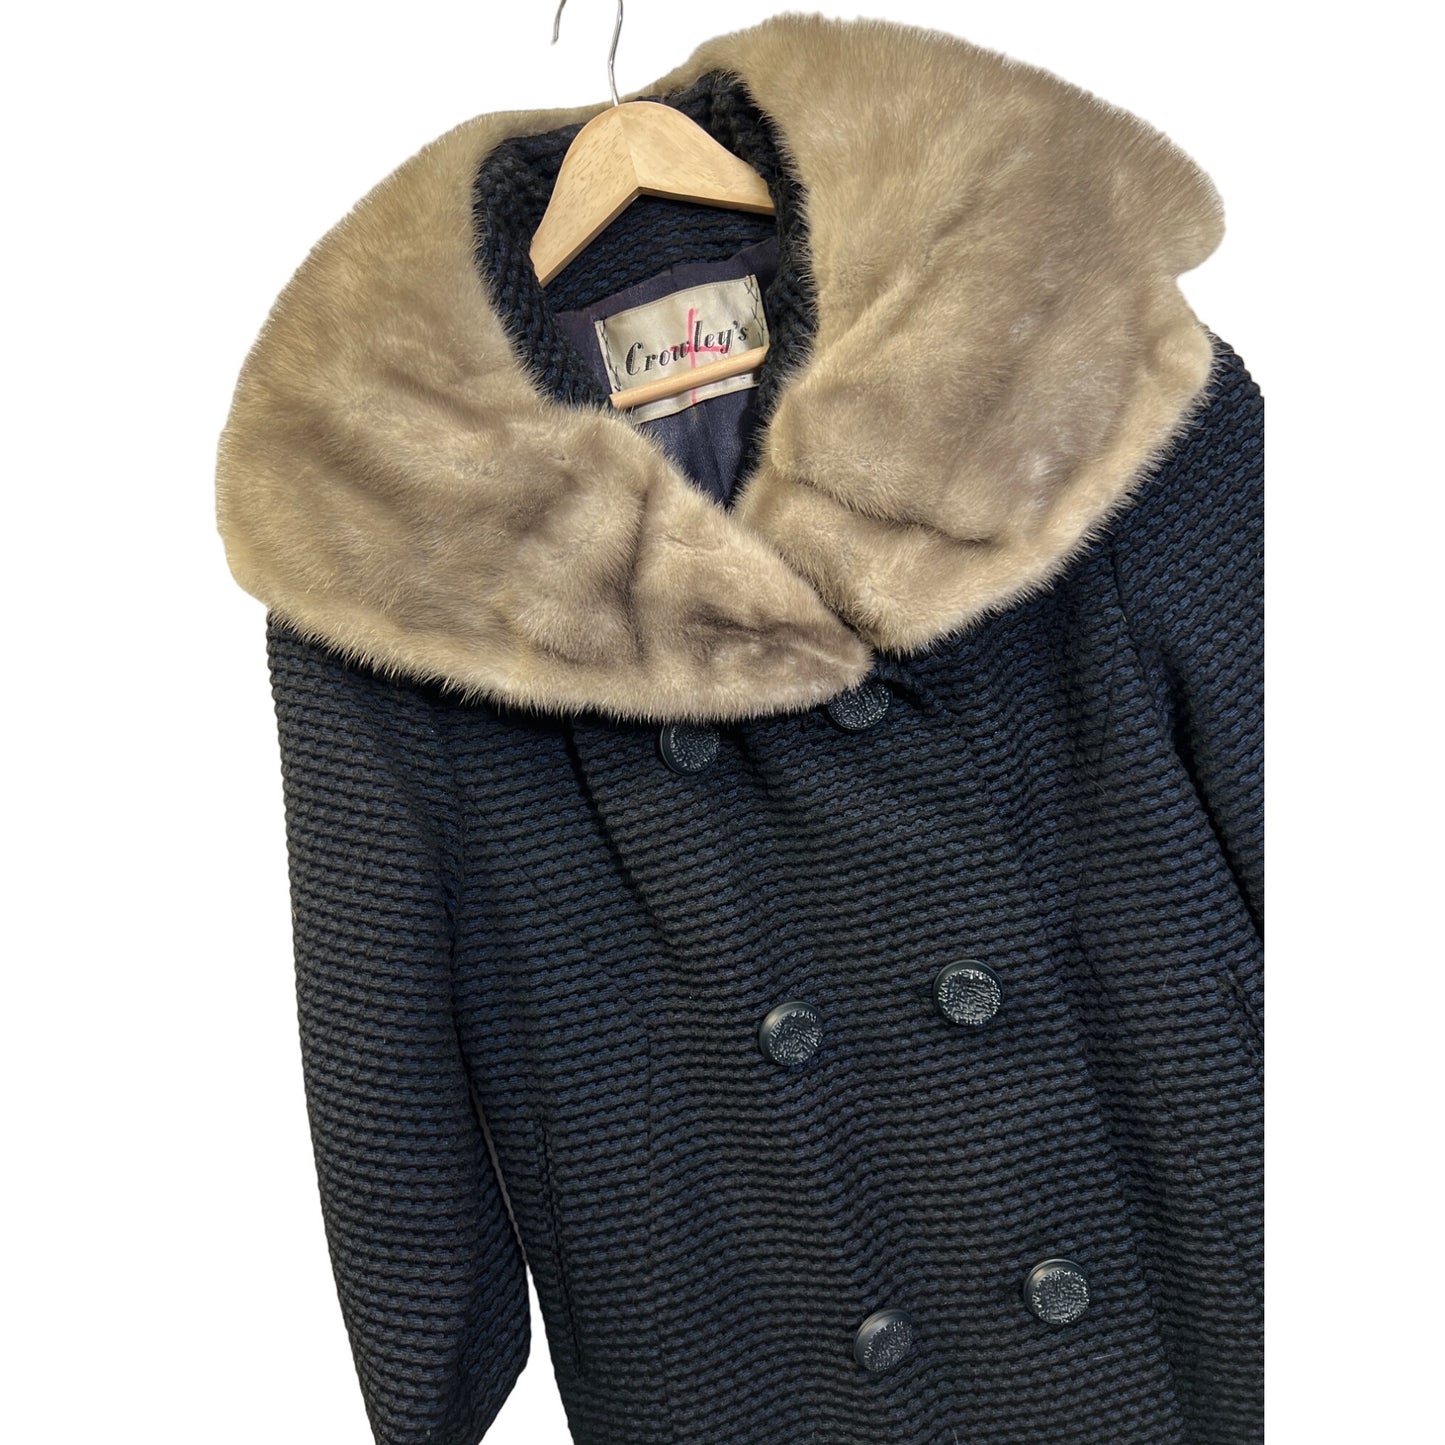 Crowley's Vintage 60's Wool Navy and Black Overcoat with Fur Collar